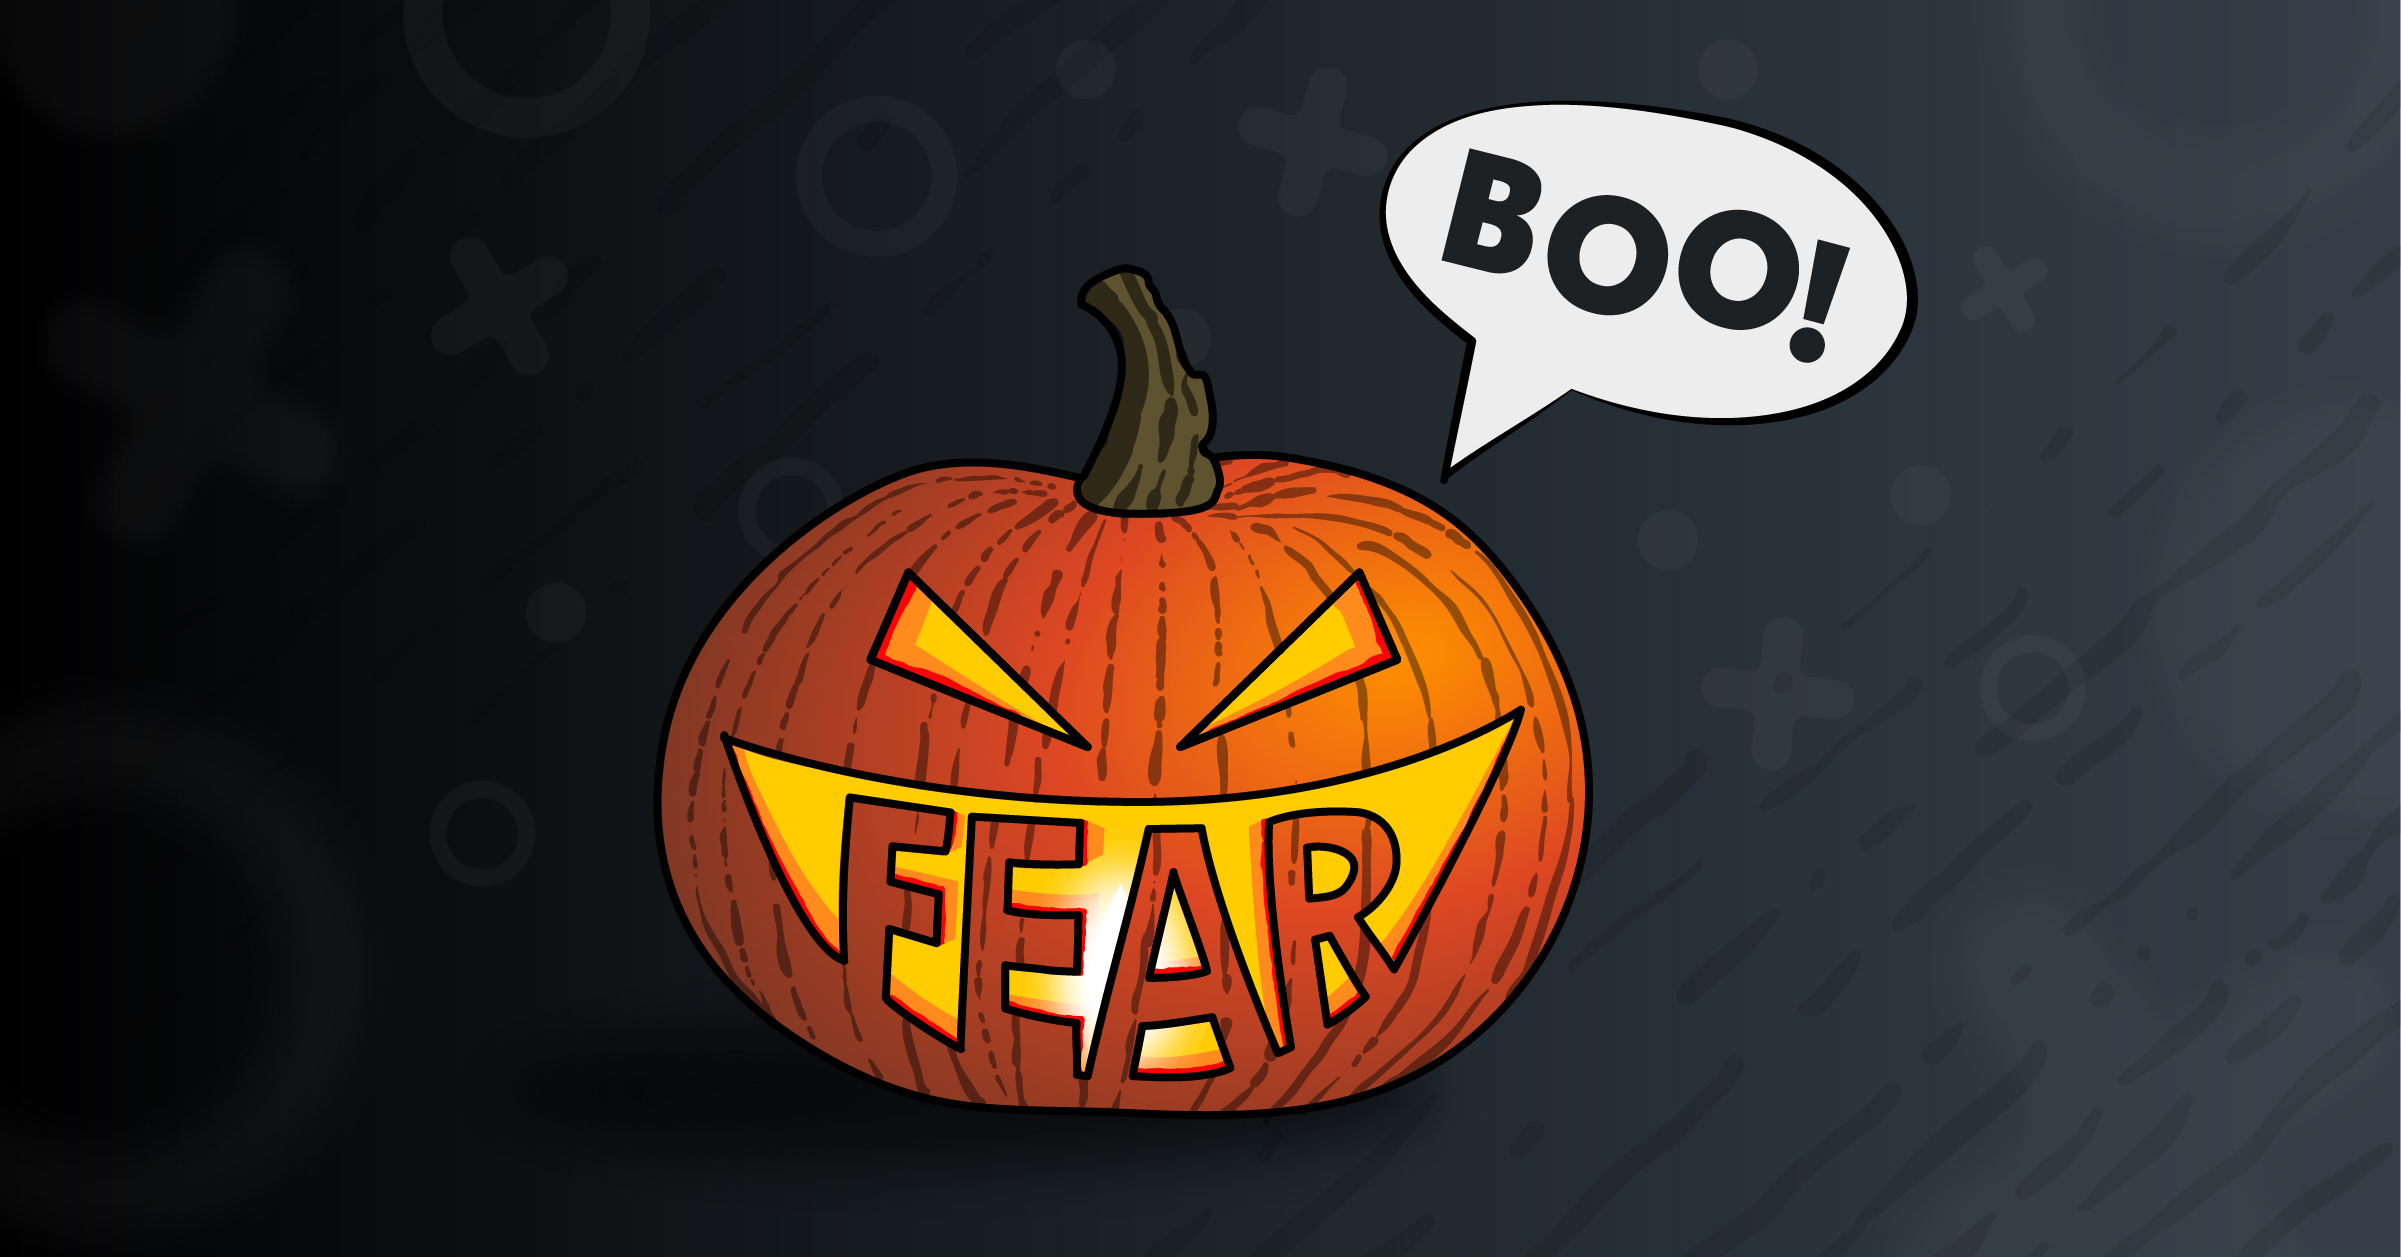 Boo! Fear Campaigns – When Do They Work?